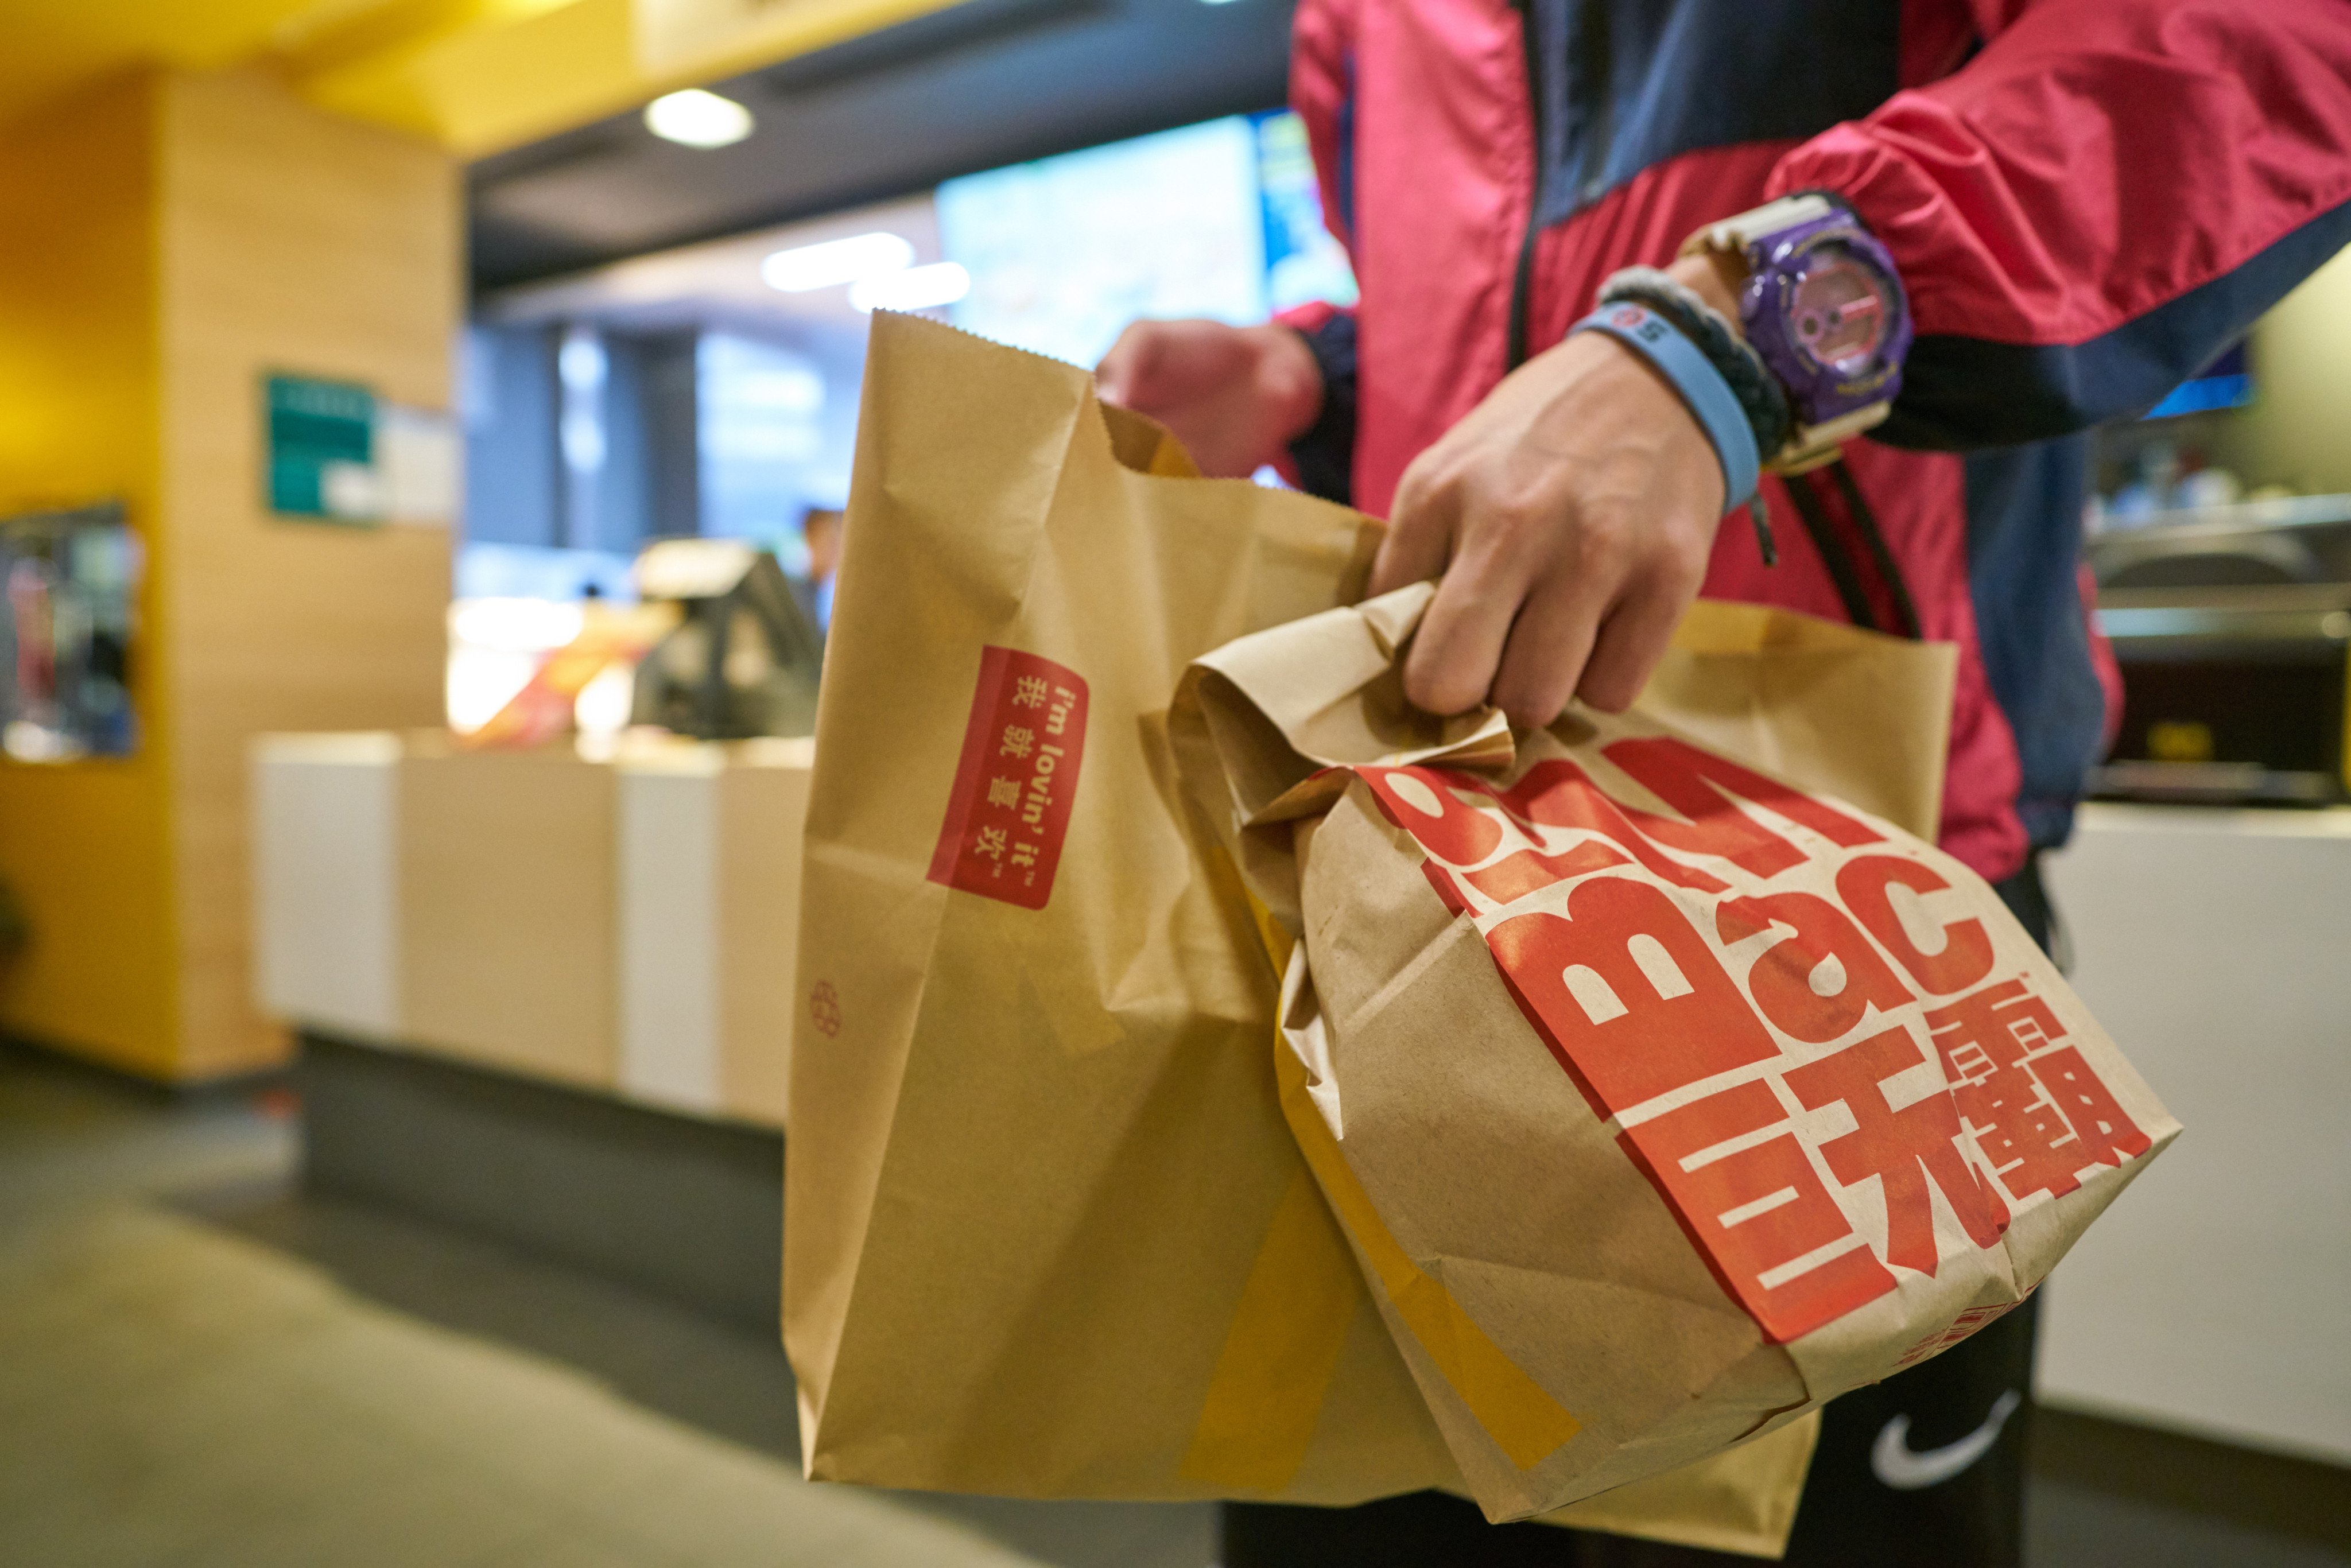 HarmonyOS Next, the new version of Huawei Technologies’ mobile operating system, will enable McDonald’s China customers to order meals by accessing its applications from various devices, including smartphones, tablets and smart cars. Photo: Shutterstock.